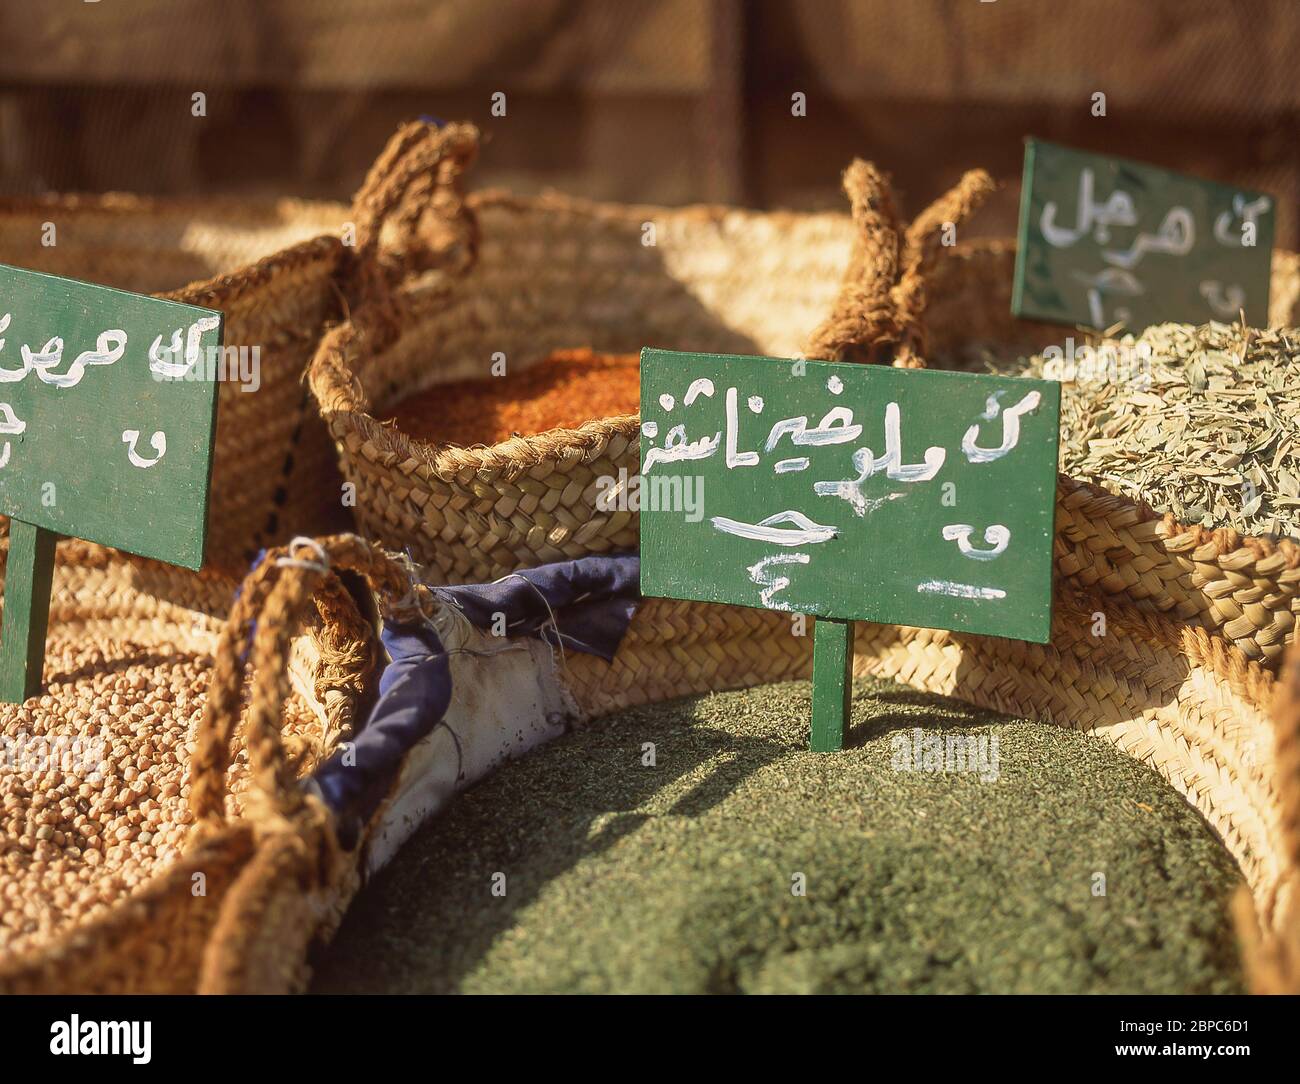 Baskets of grains and spices in local market, Karnak, Karnak Governorate, Republic of Egypt Stock Photo